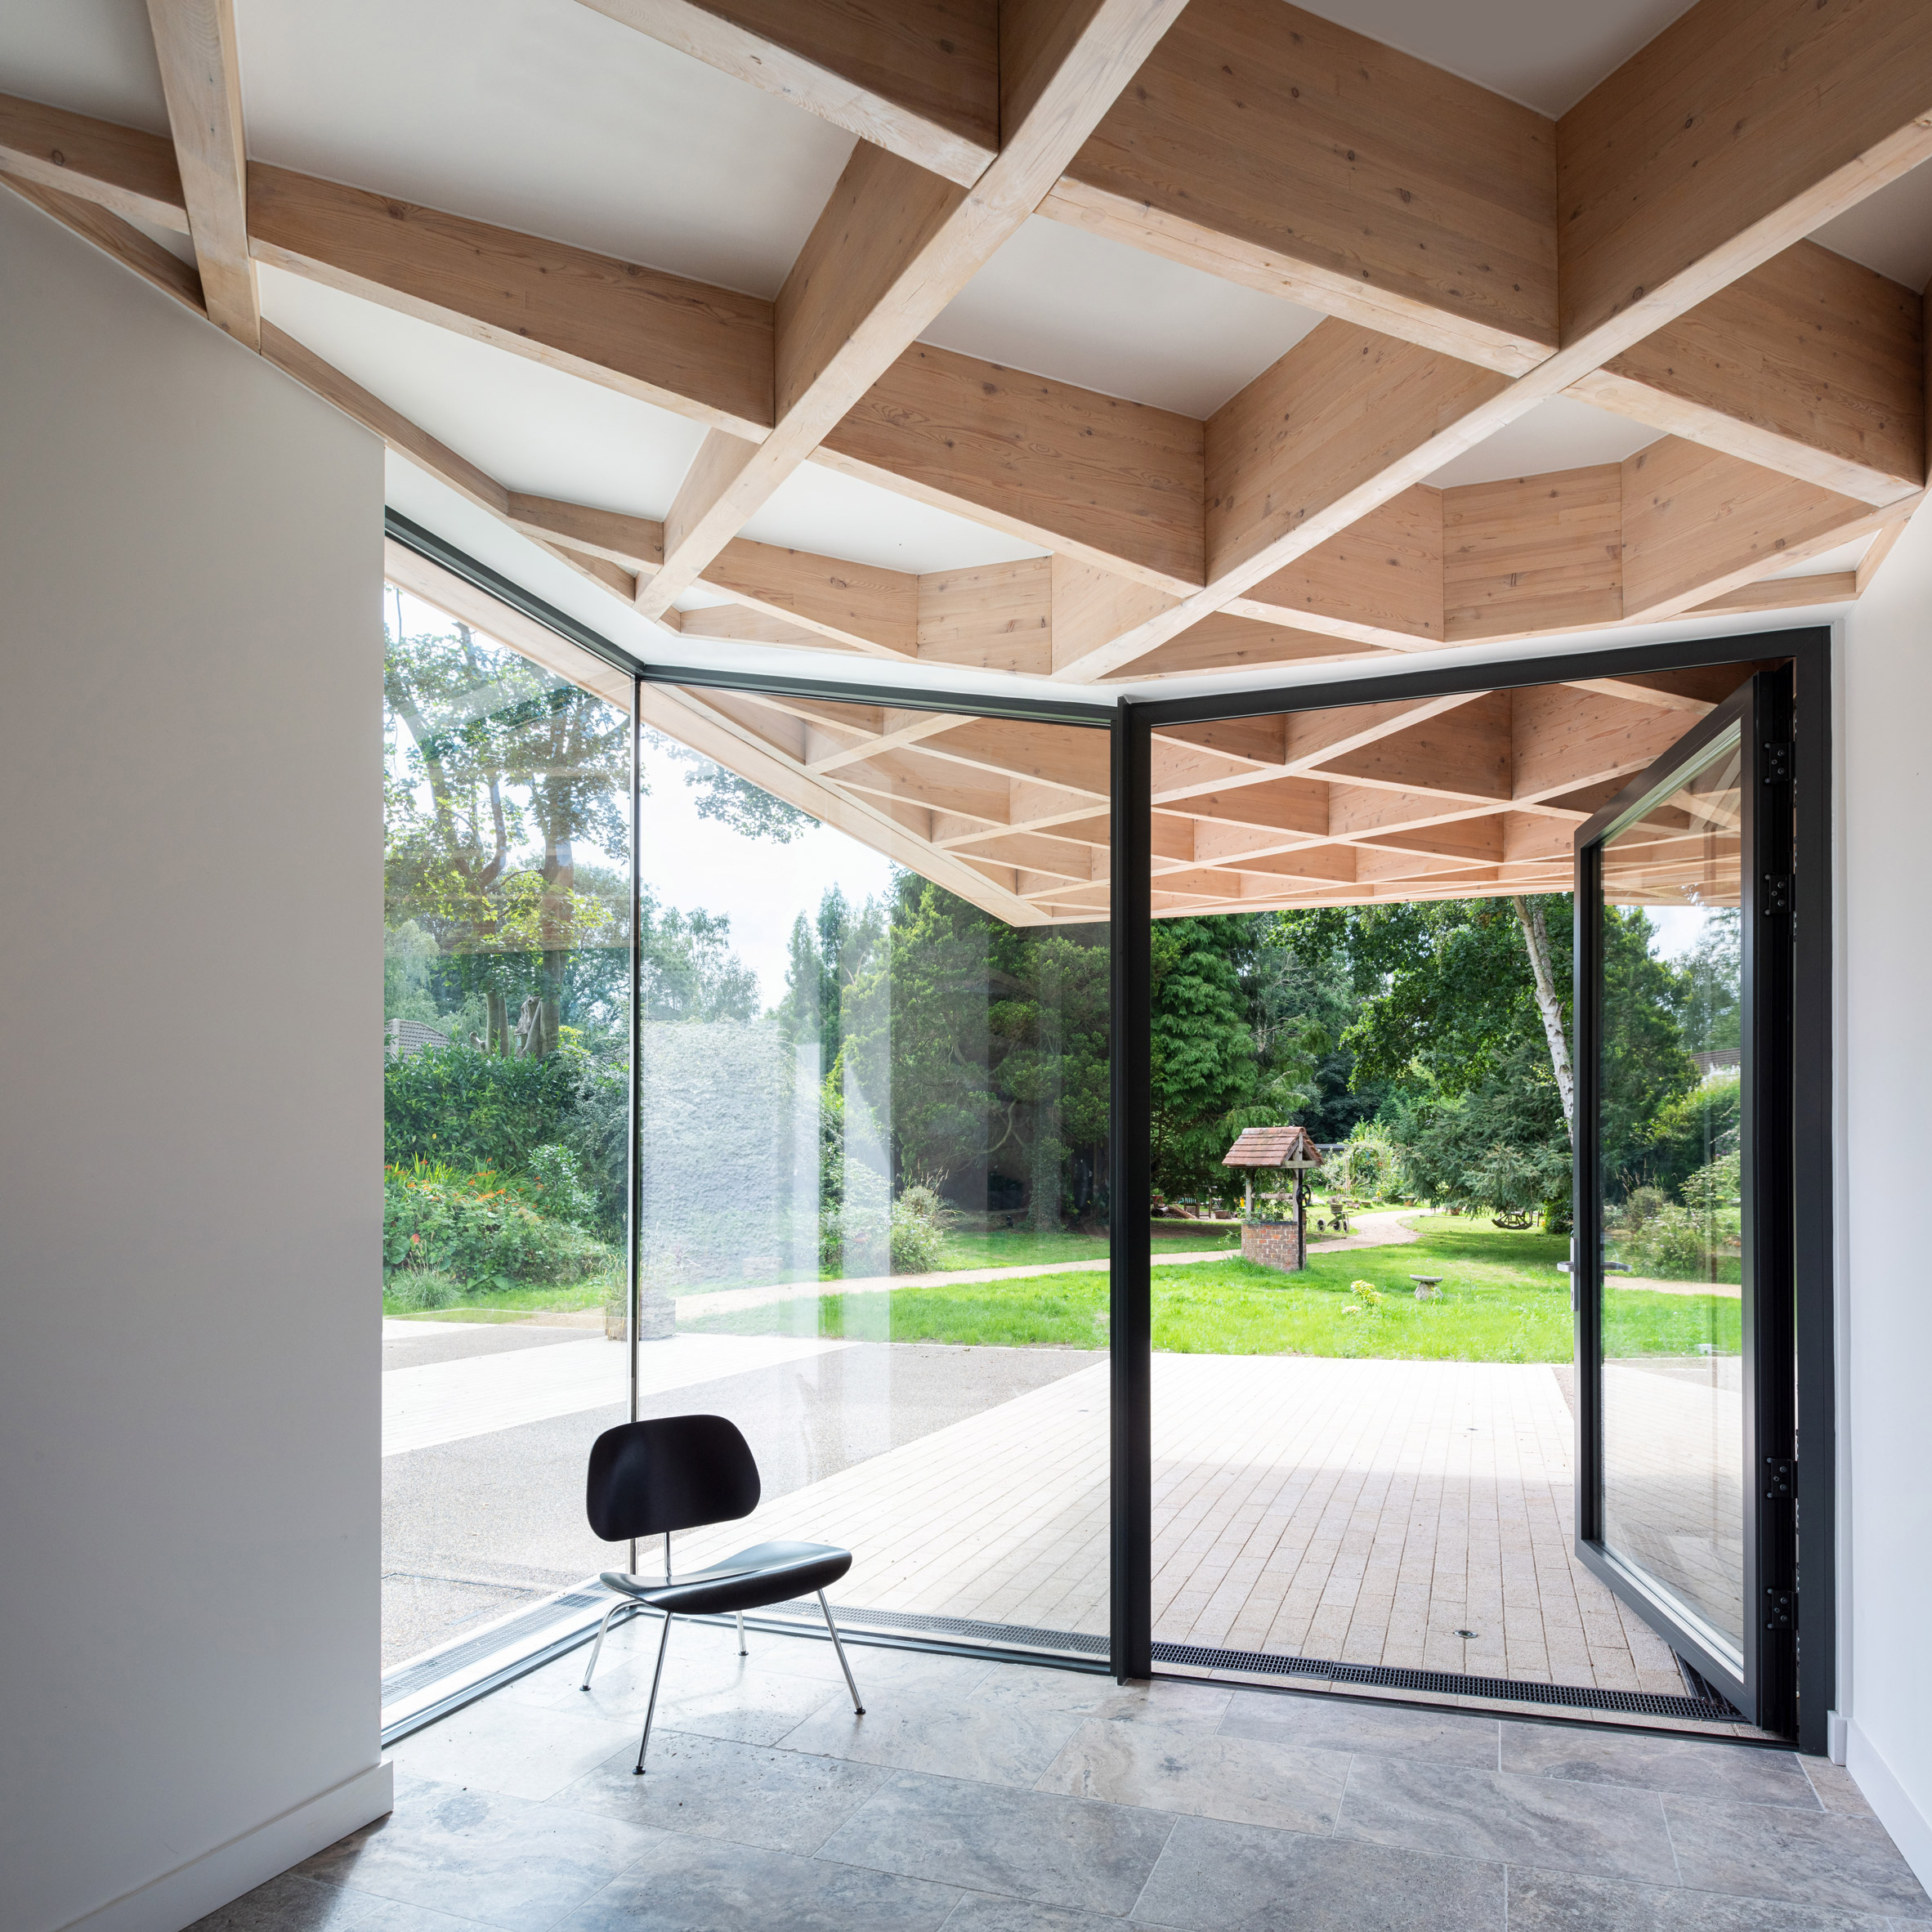 Timber diagrid roof in House for Theo and Oskar by Tigg + Coll